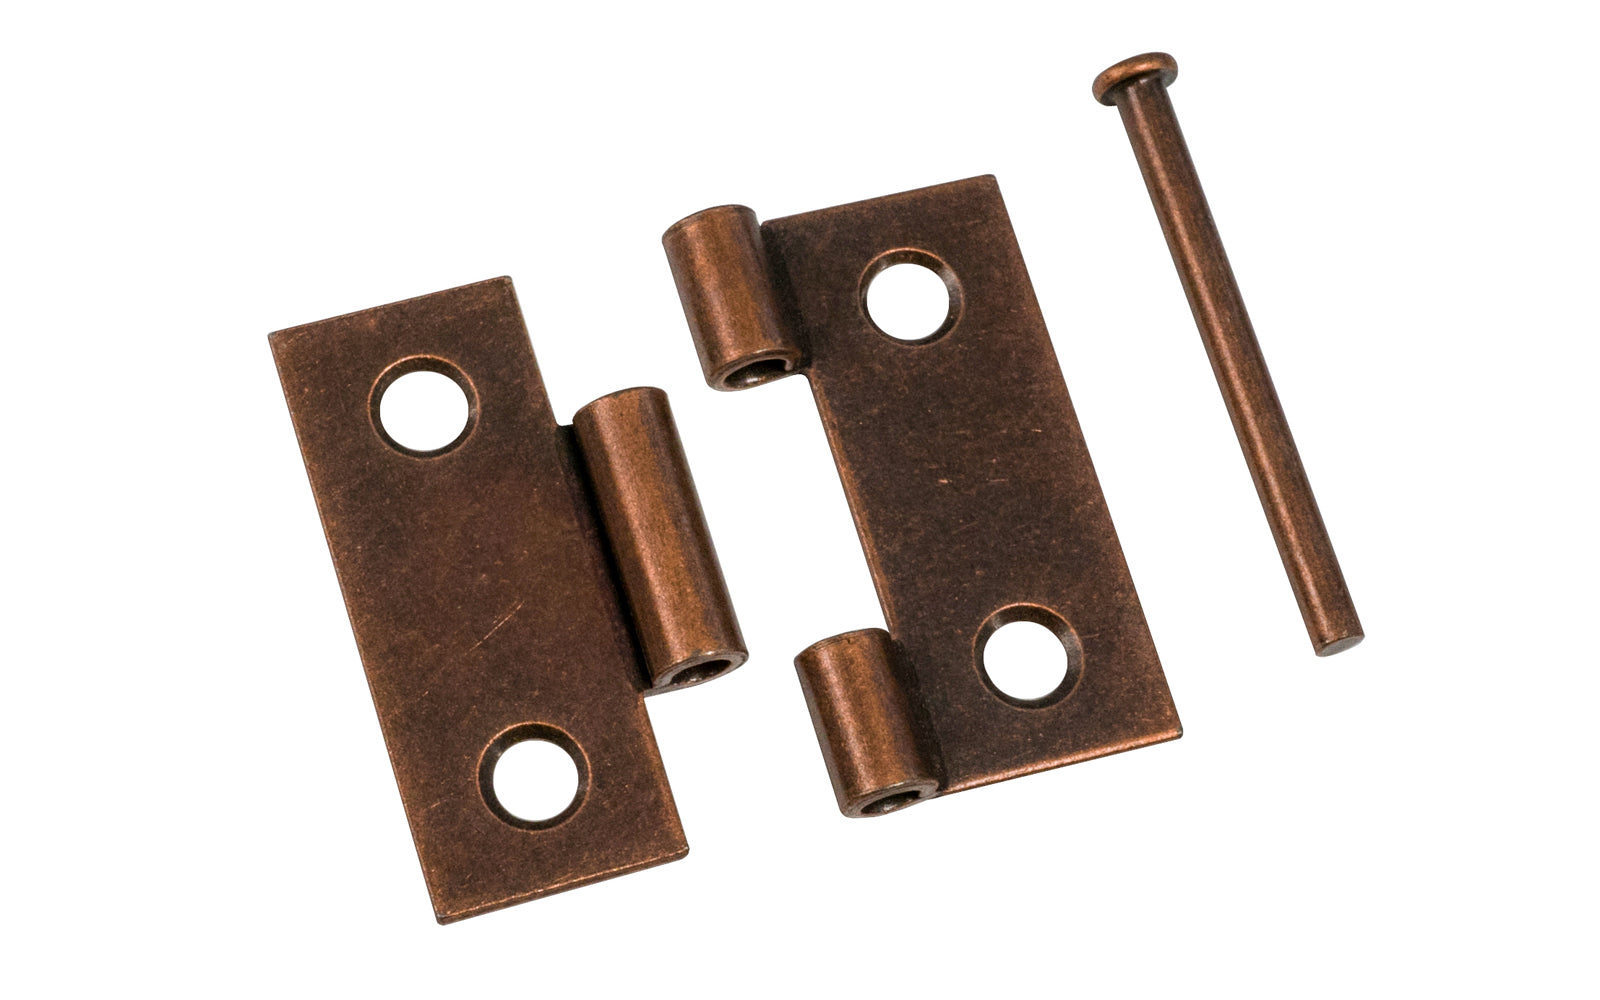 Traditional & classic plated steel butt cabinet hinges with loose pins. Removable hinge pins. 1-1/2" high x 1-1/2" wide. 1/16" leaf thickness gauge. Sold as a pair of hinges. Antique Copper Finish.